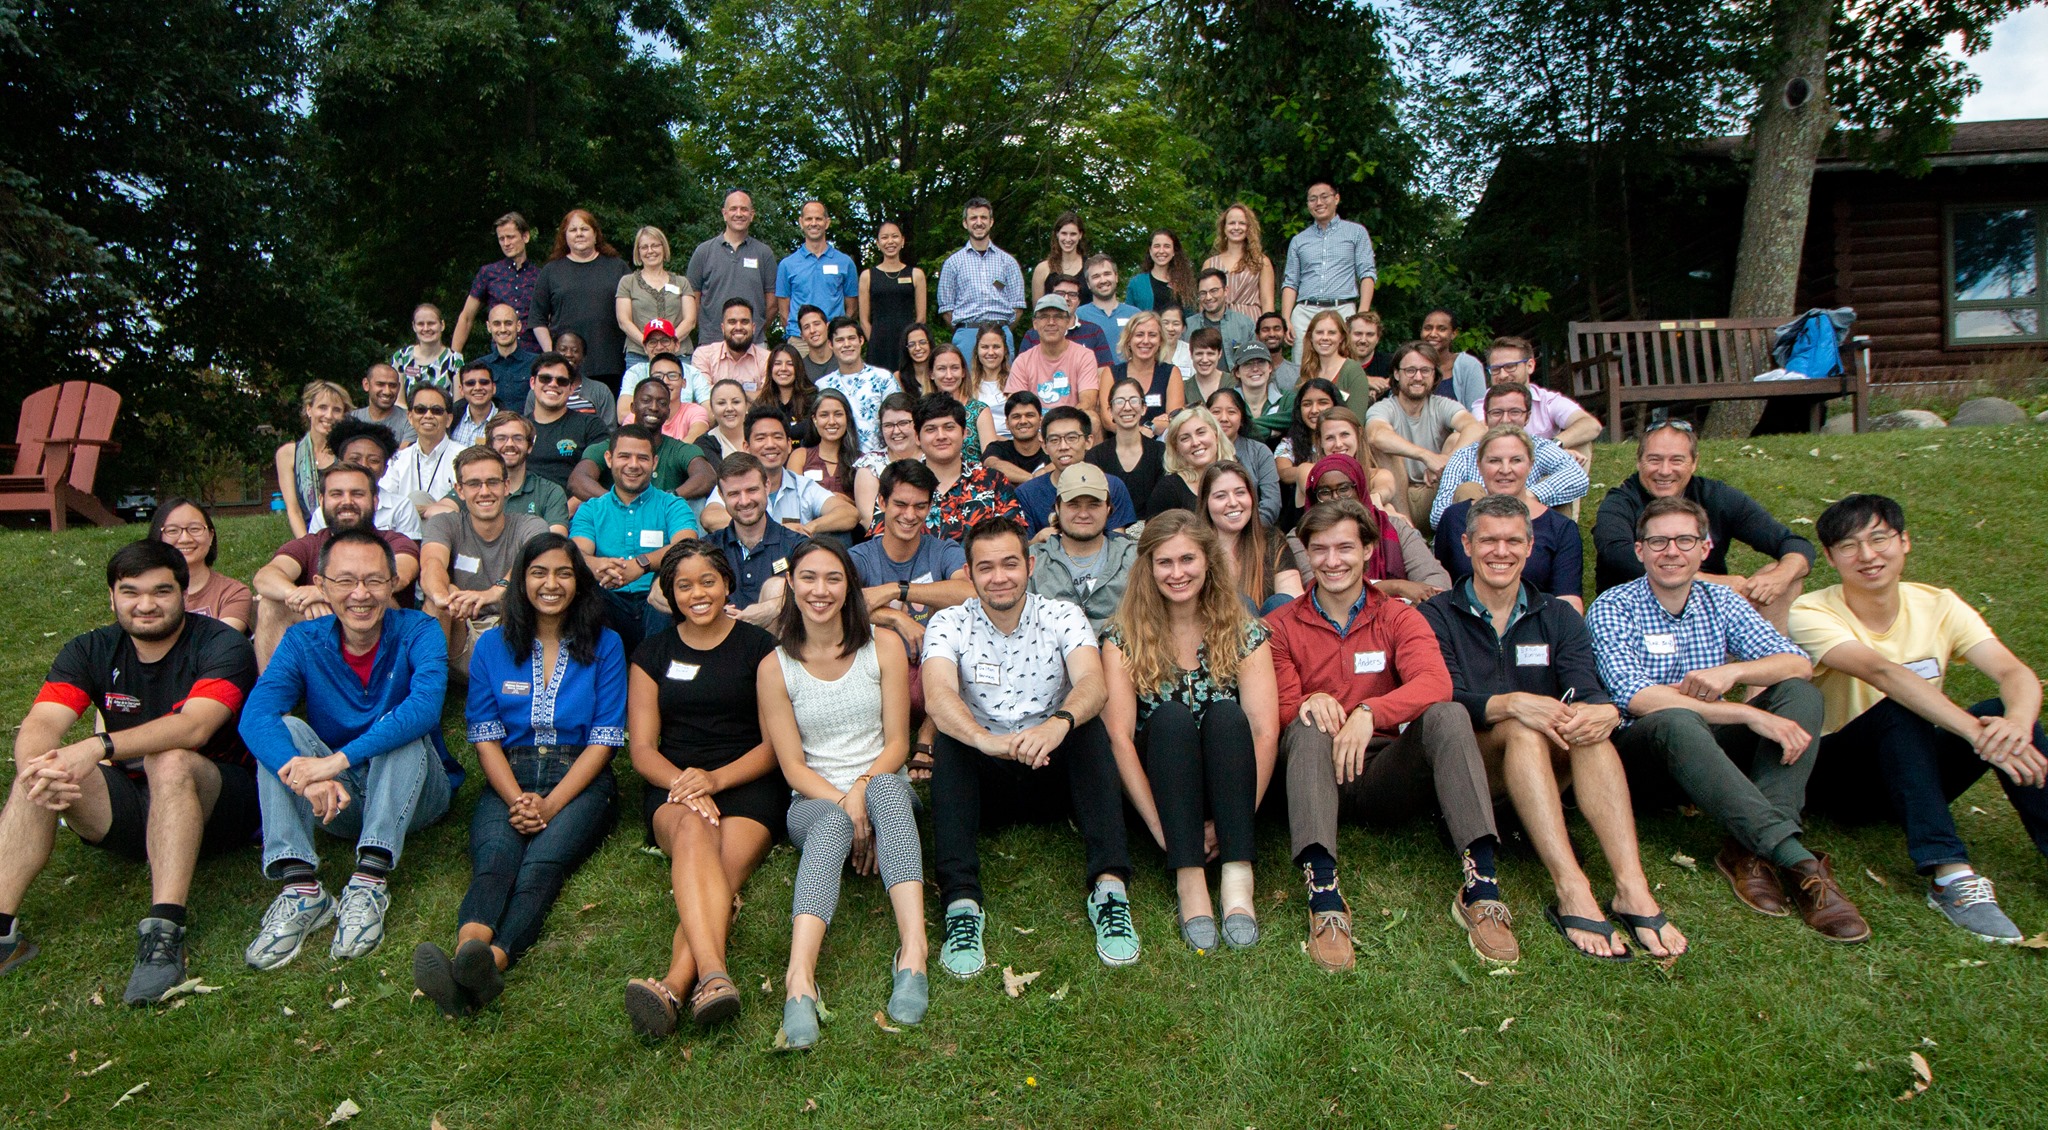 Group picture of UMN Medical Scientist Training Program 2019 retreat attendees